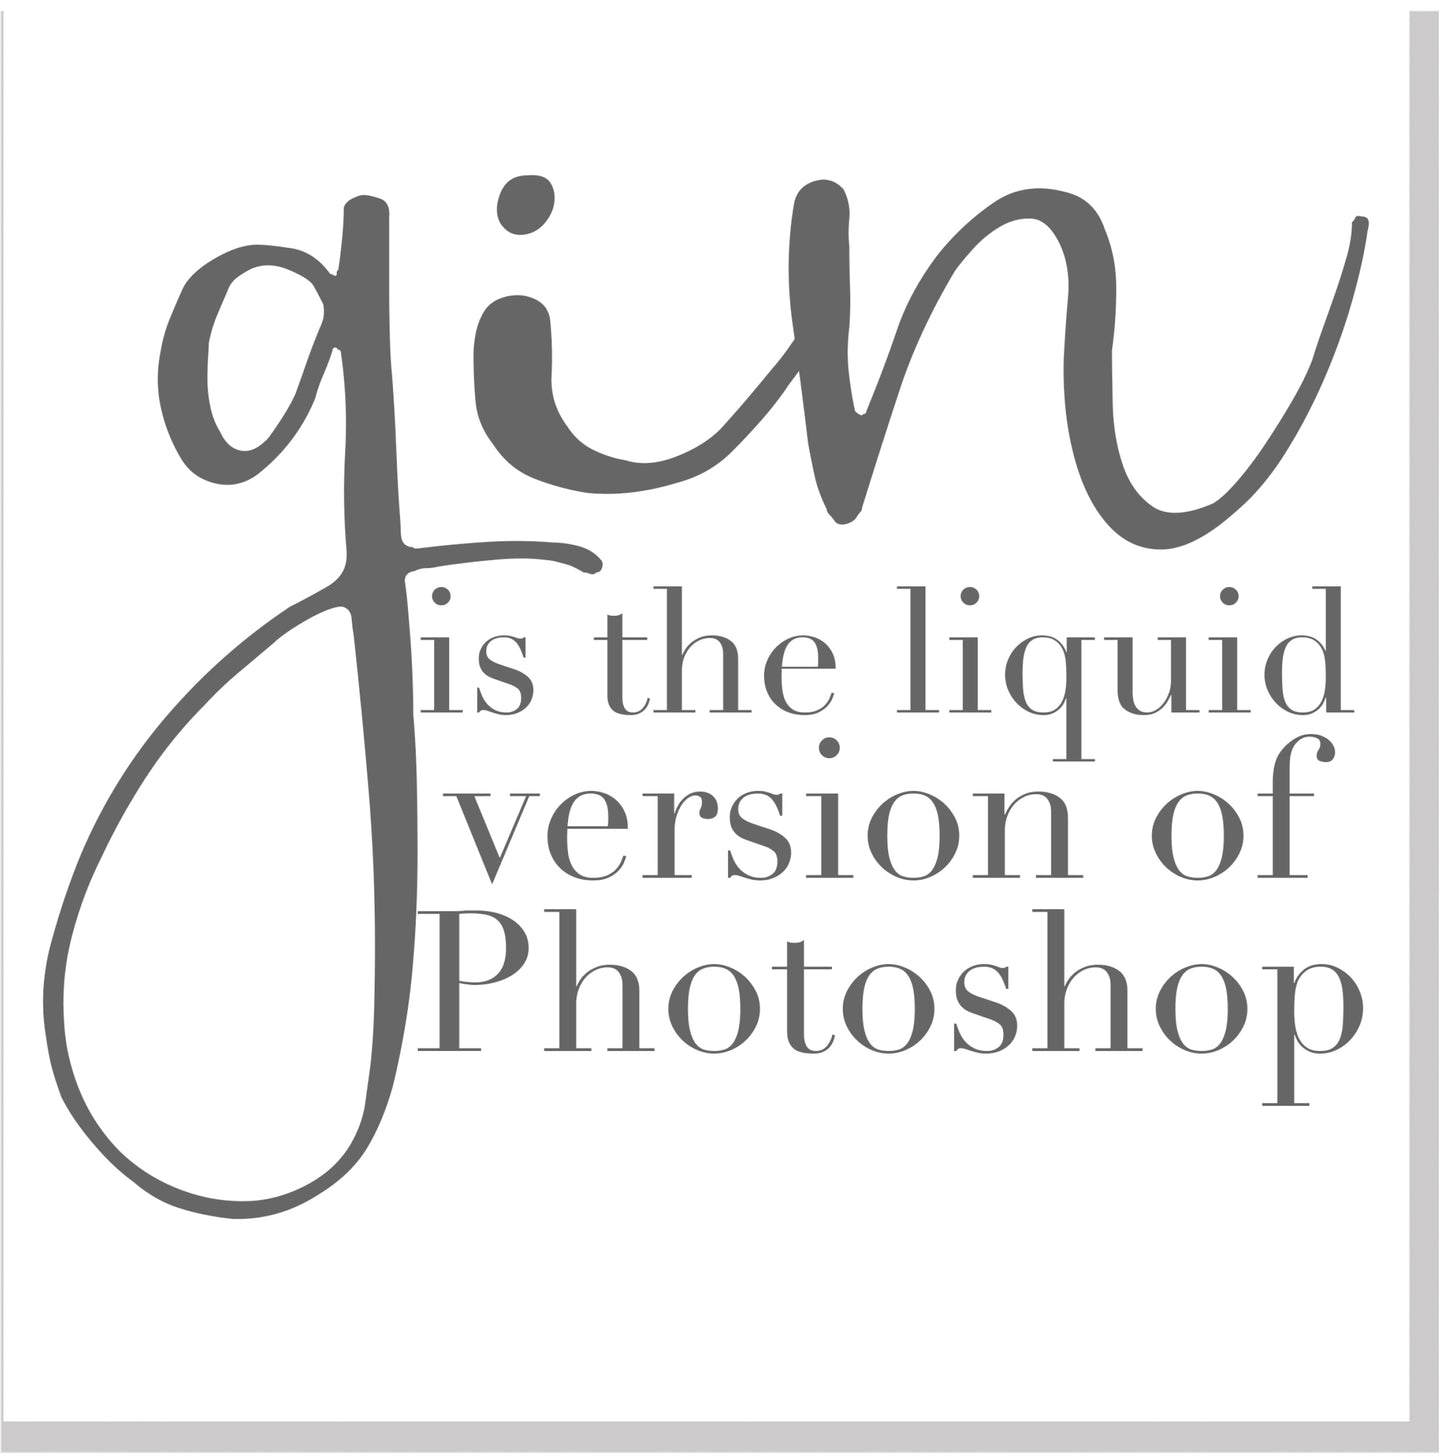 Gin Photoshop square card